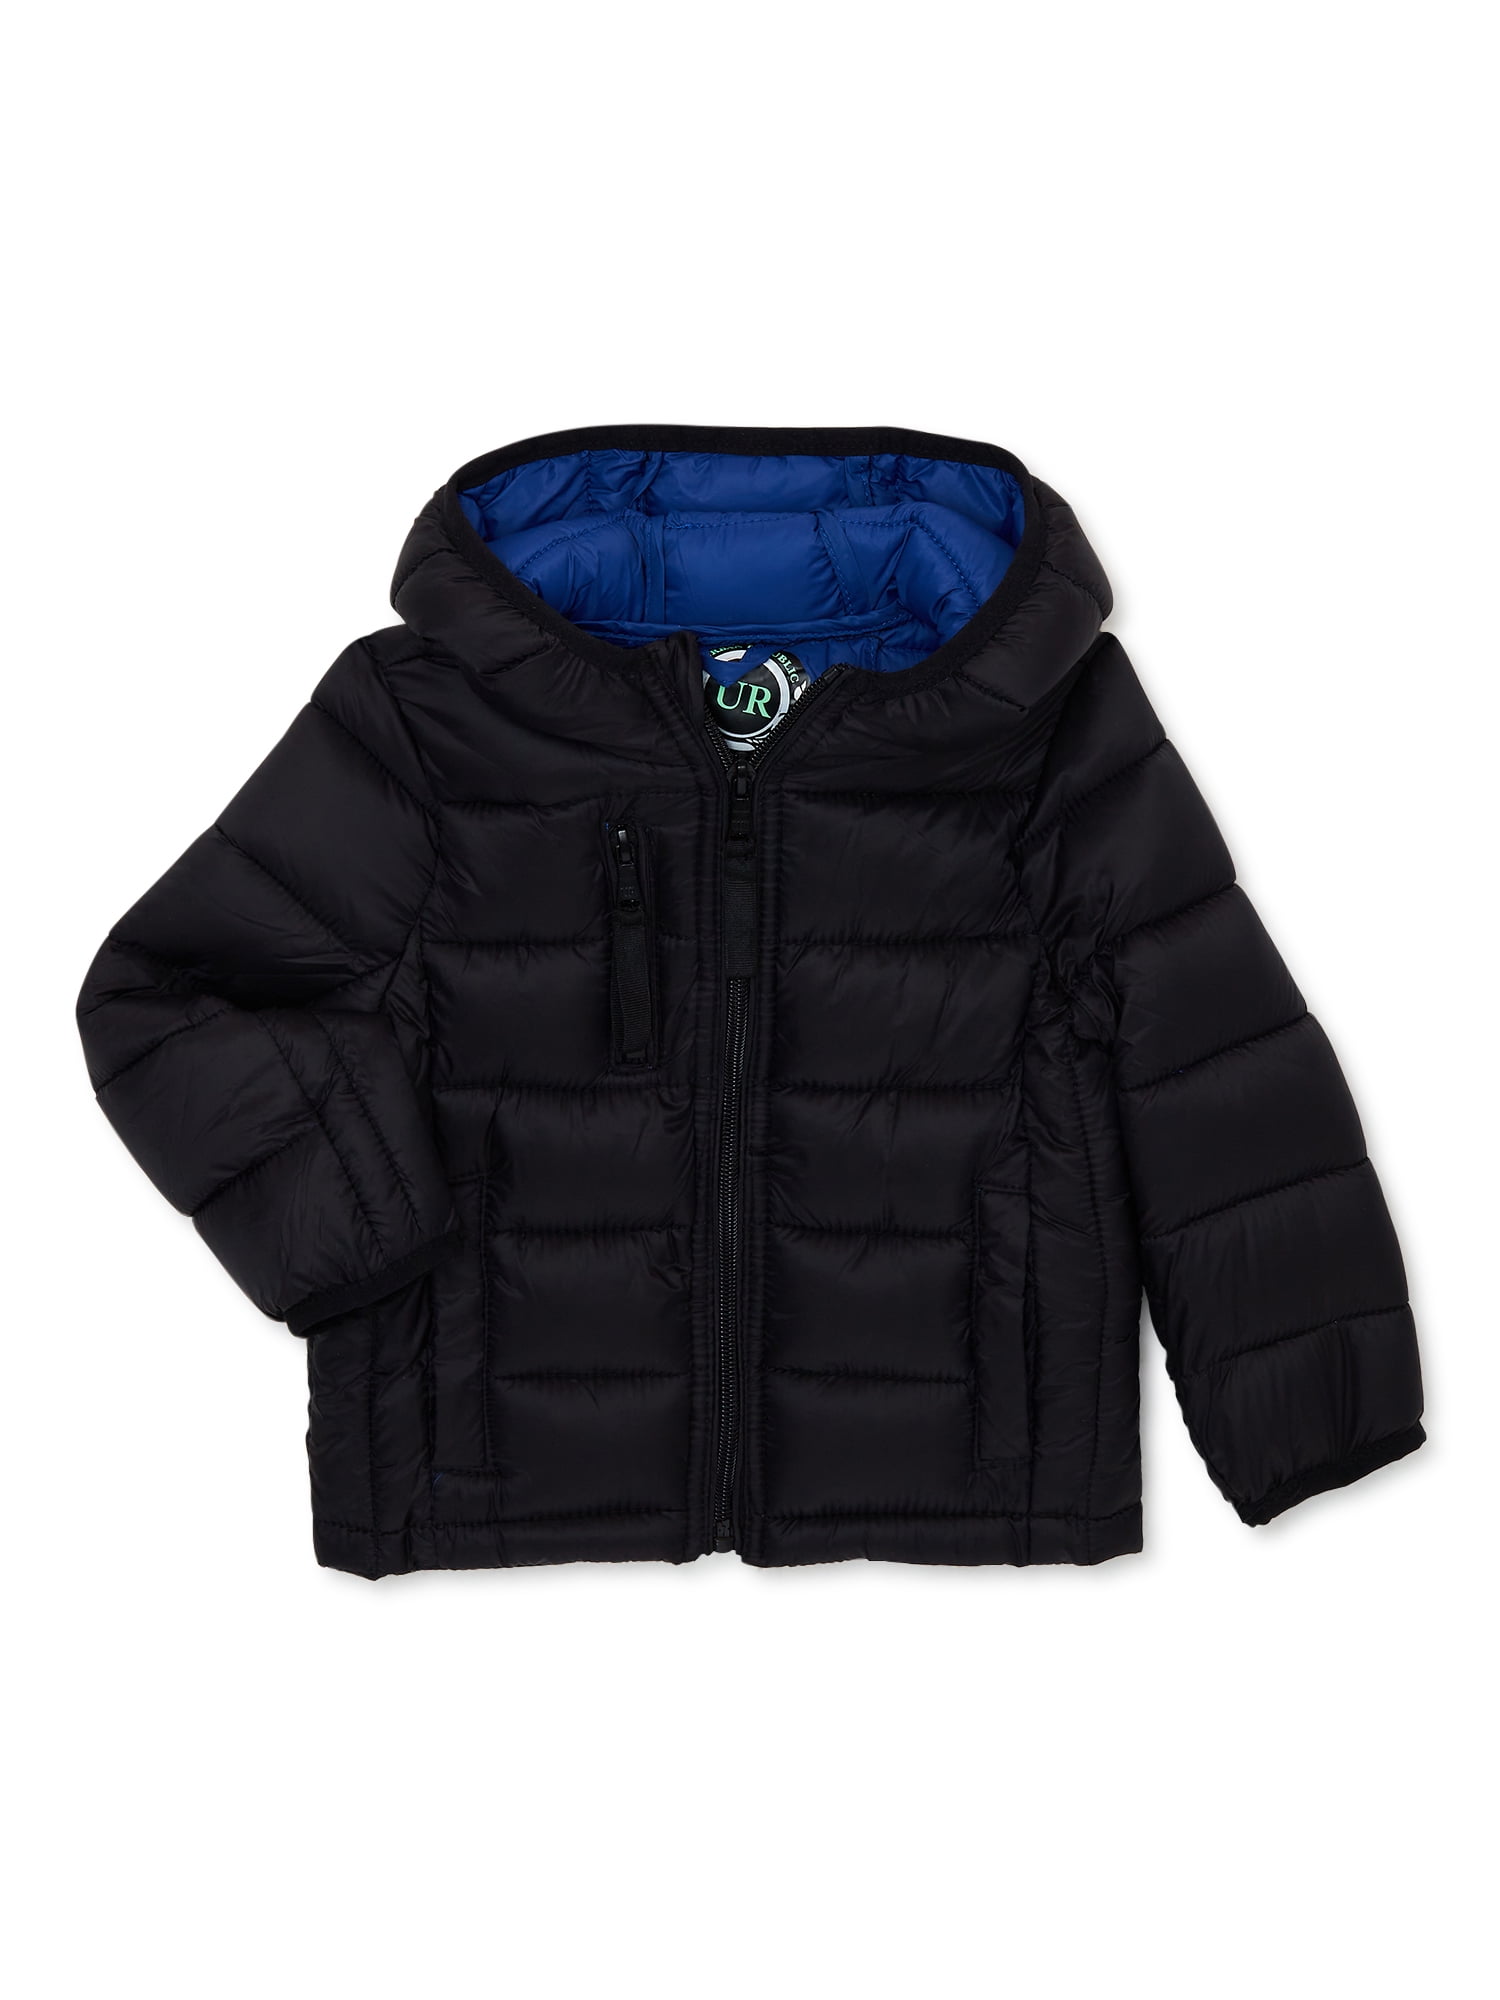 Urban Republic Toddler Boy Packable Quilted Puffer Jacket, Sizes 12M-4T ...